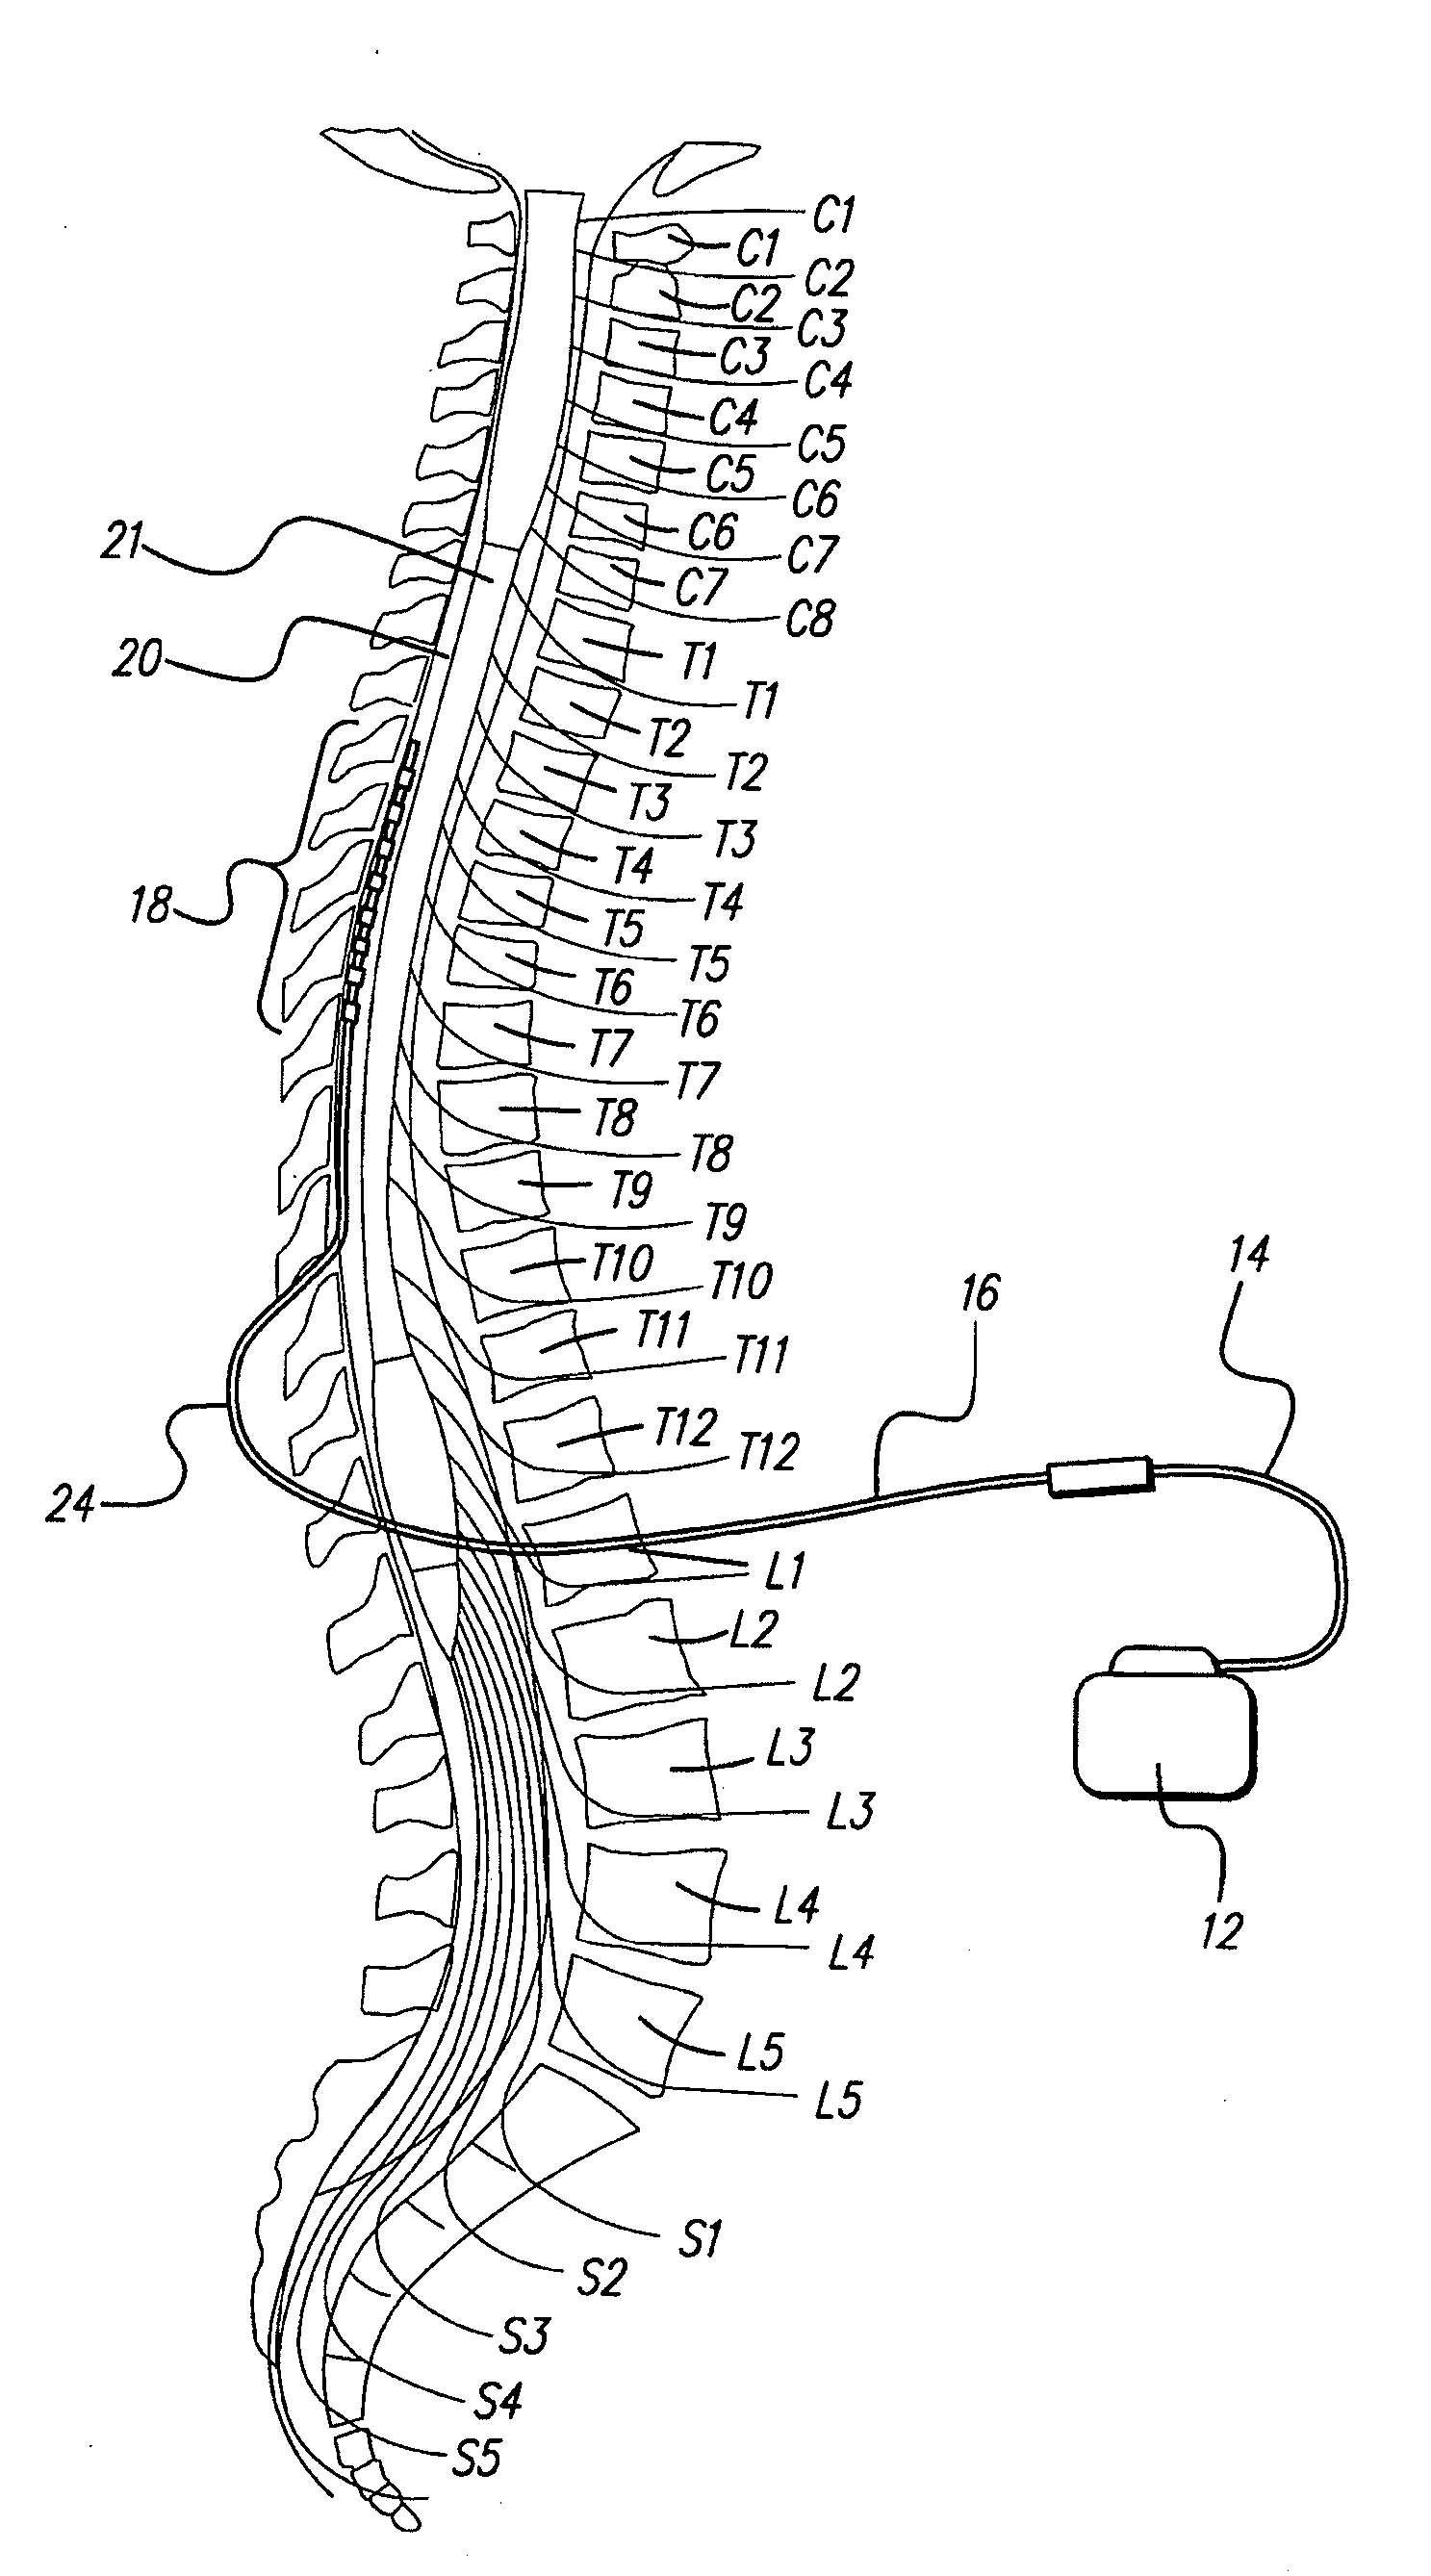 Method for optimizing search for spinal cord stimulation parameter setting